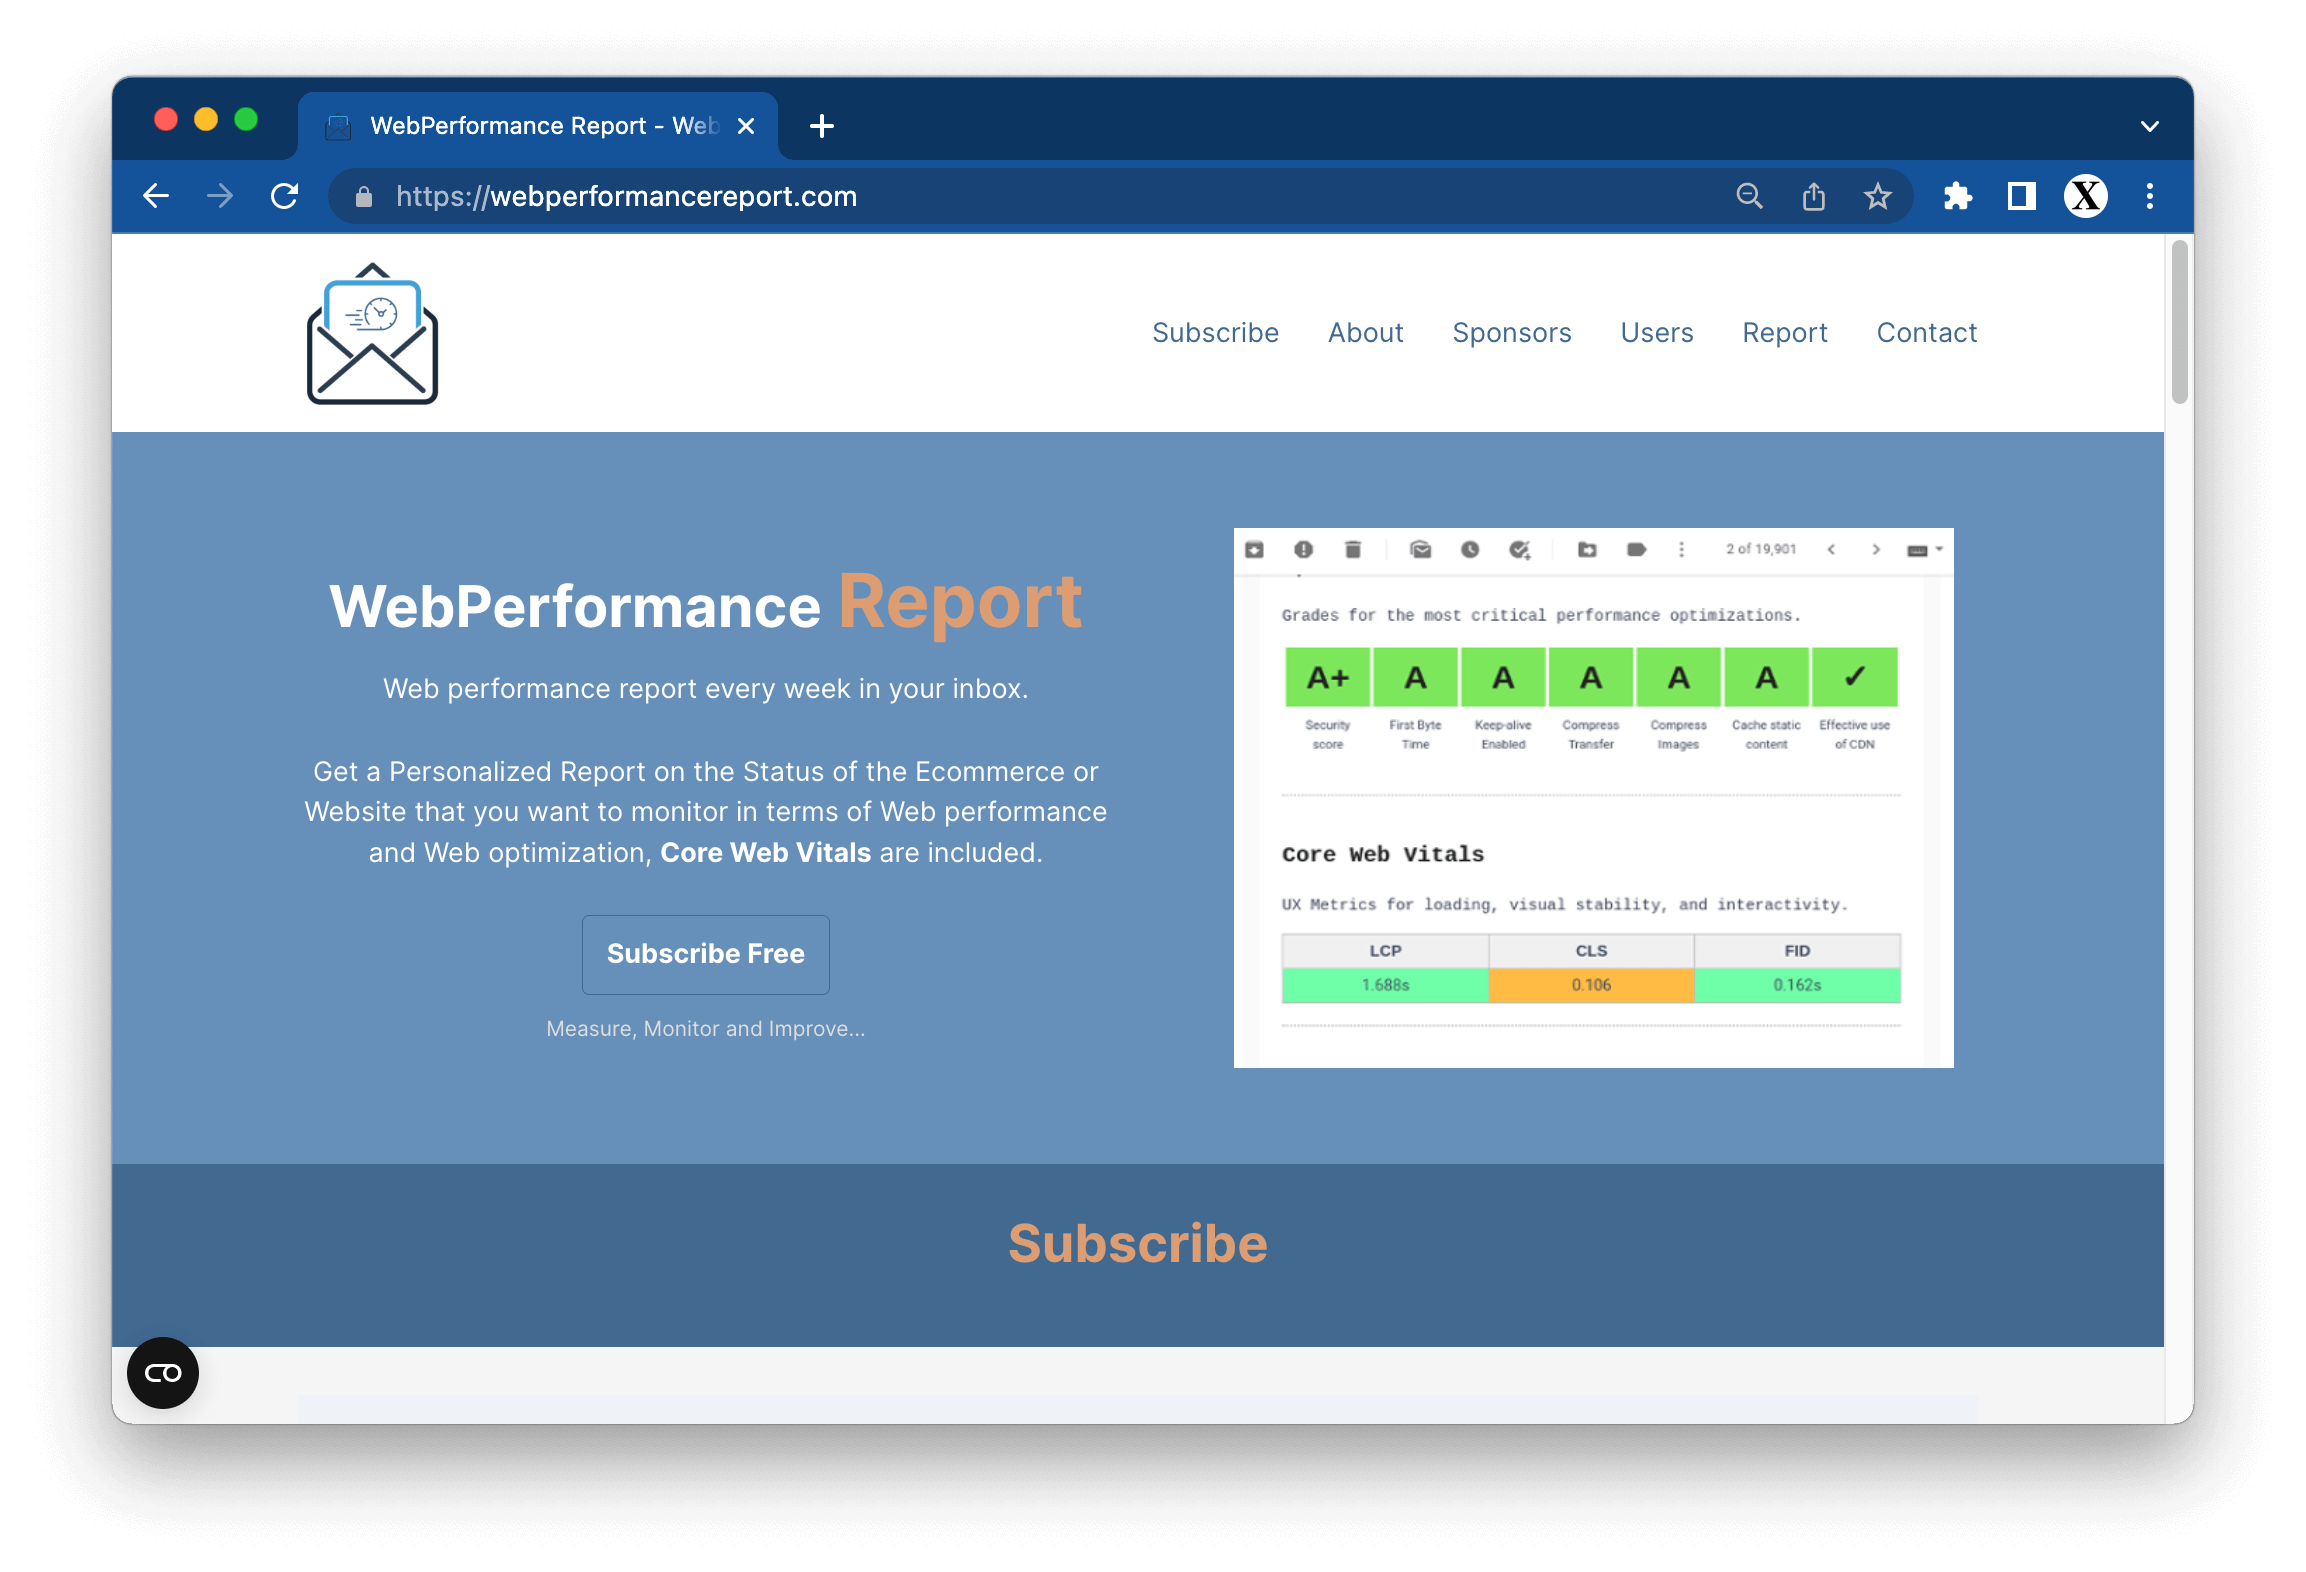 WebPerformance Report - Web performance report every week in your inbox